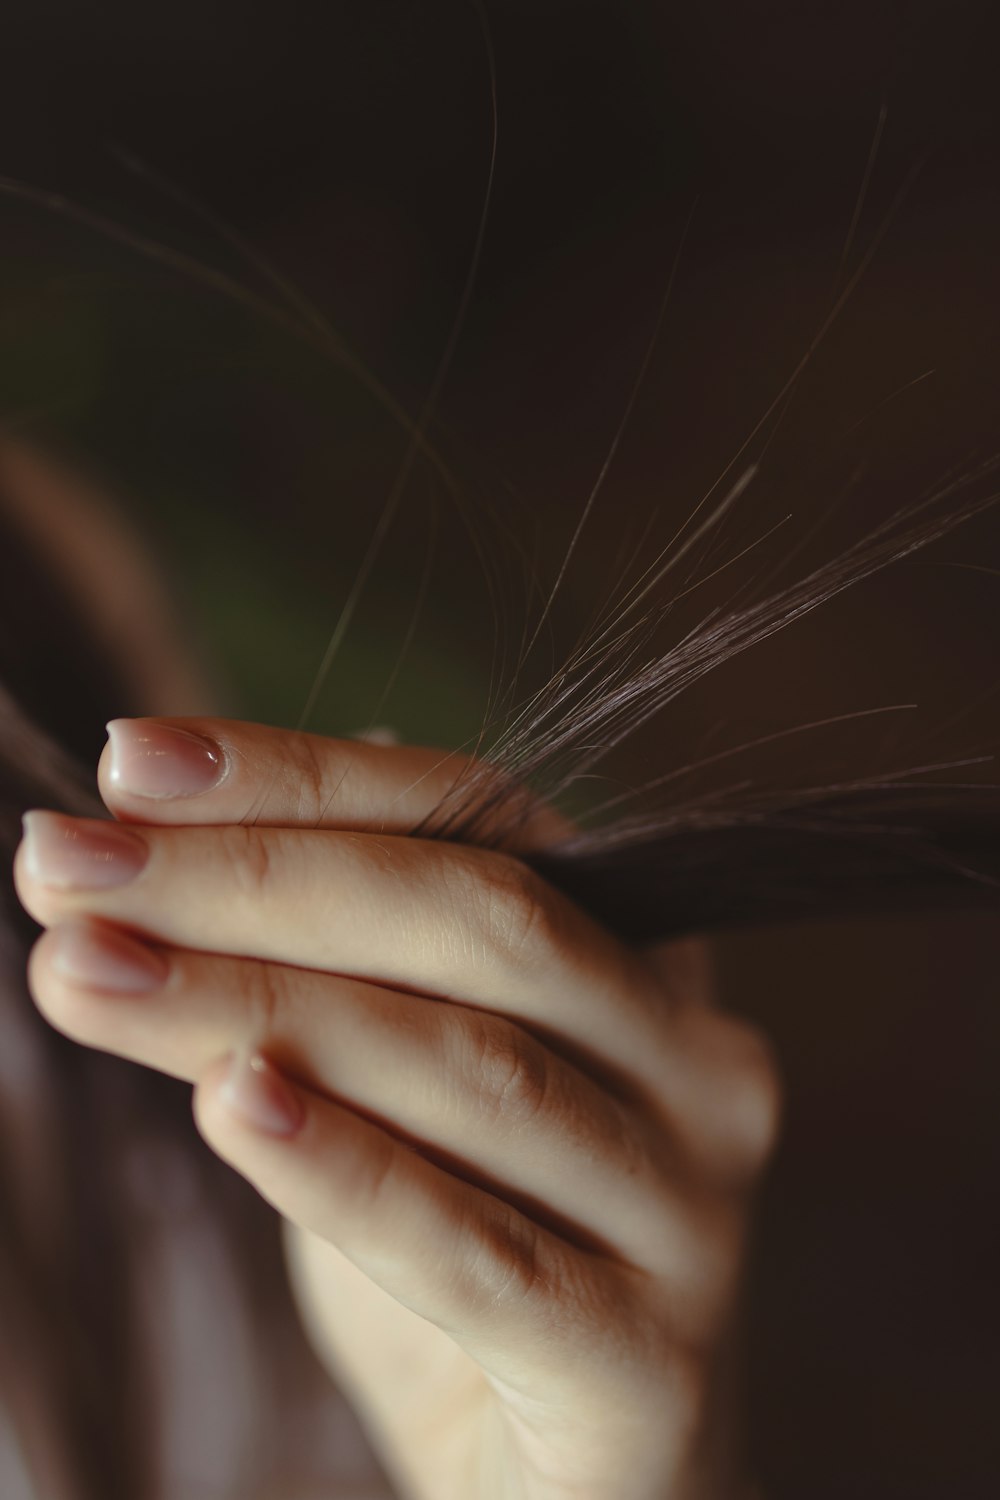 a close up of a person's hands holding a feather